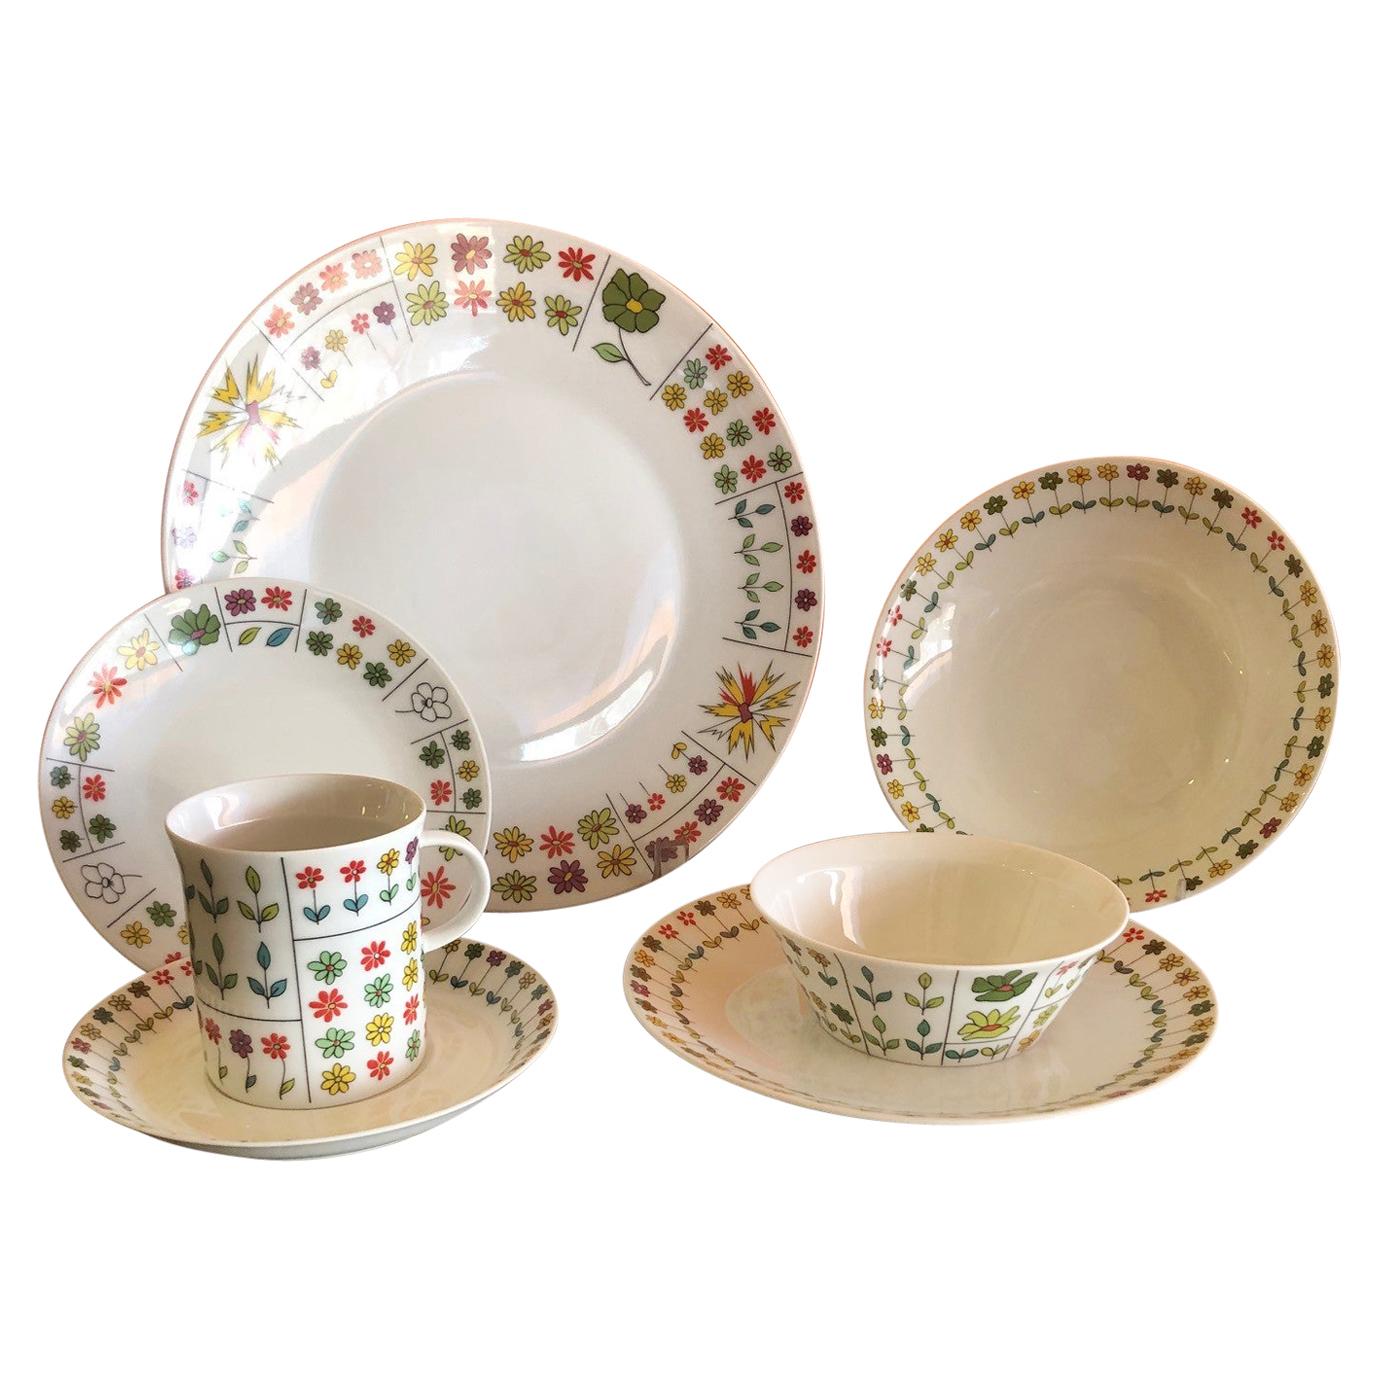 Collection of Piemonte Dinnerware by Emilio Pucci for Rosenthal Studio Line